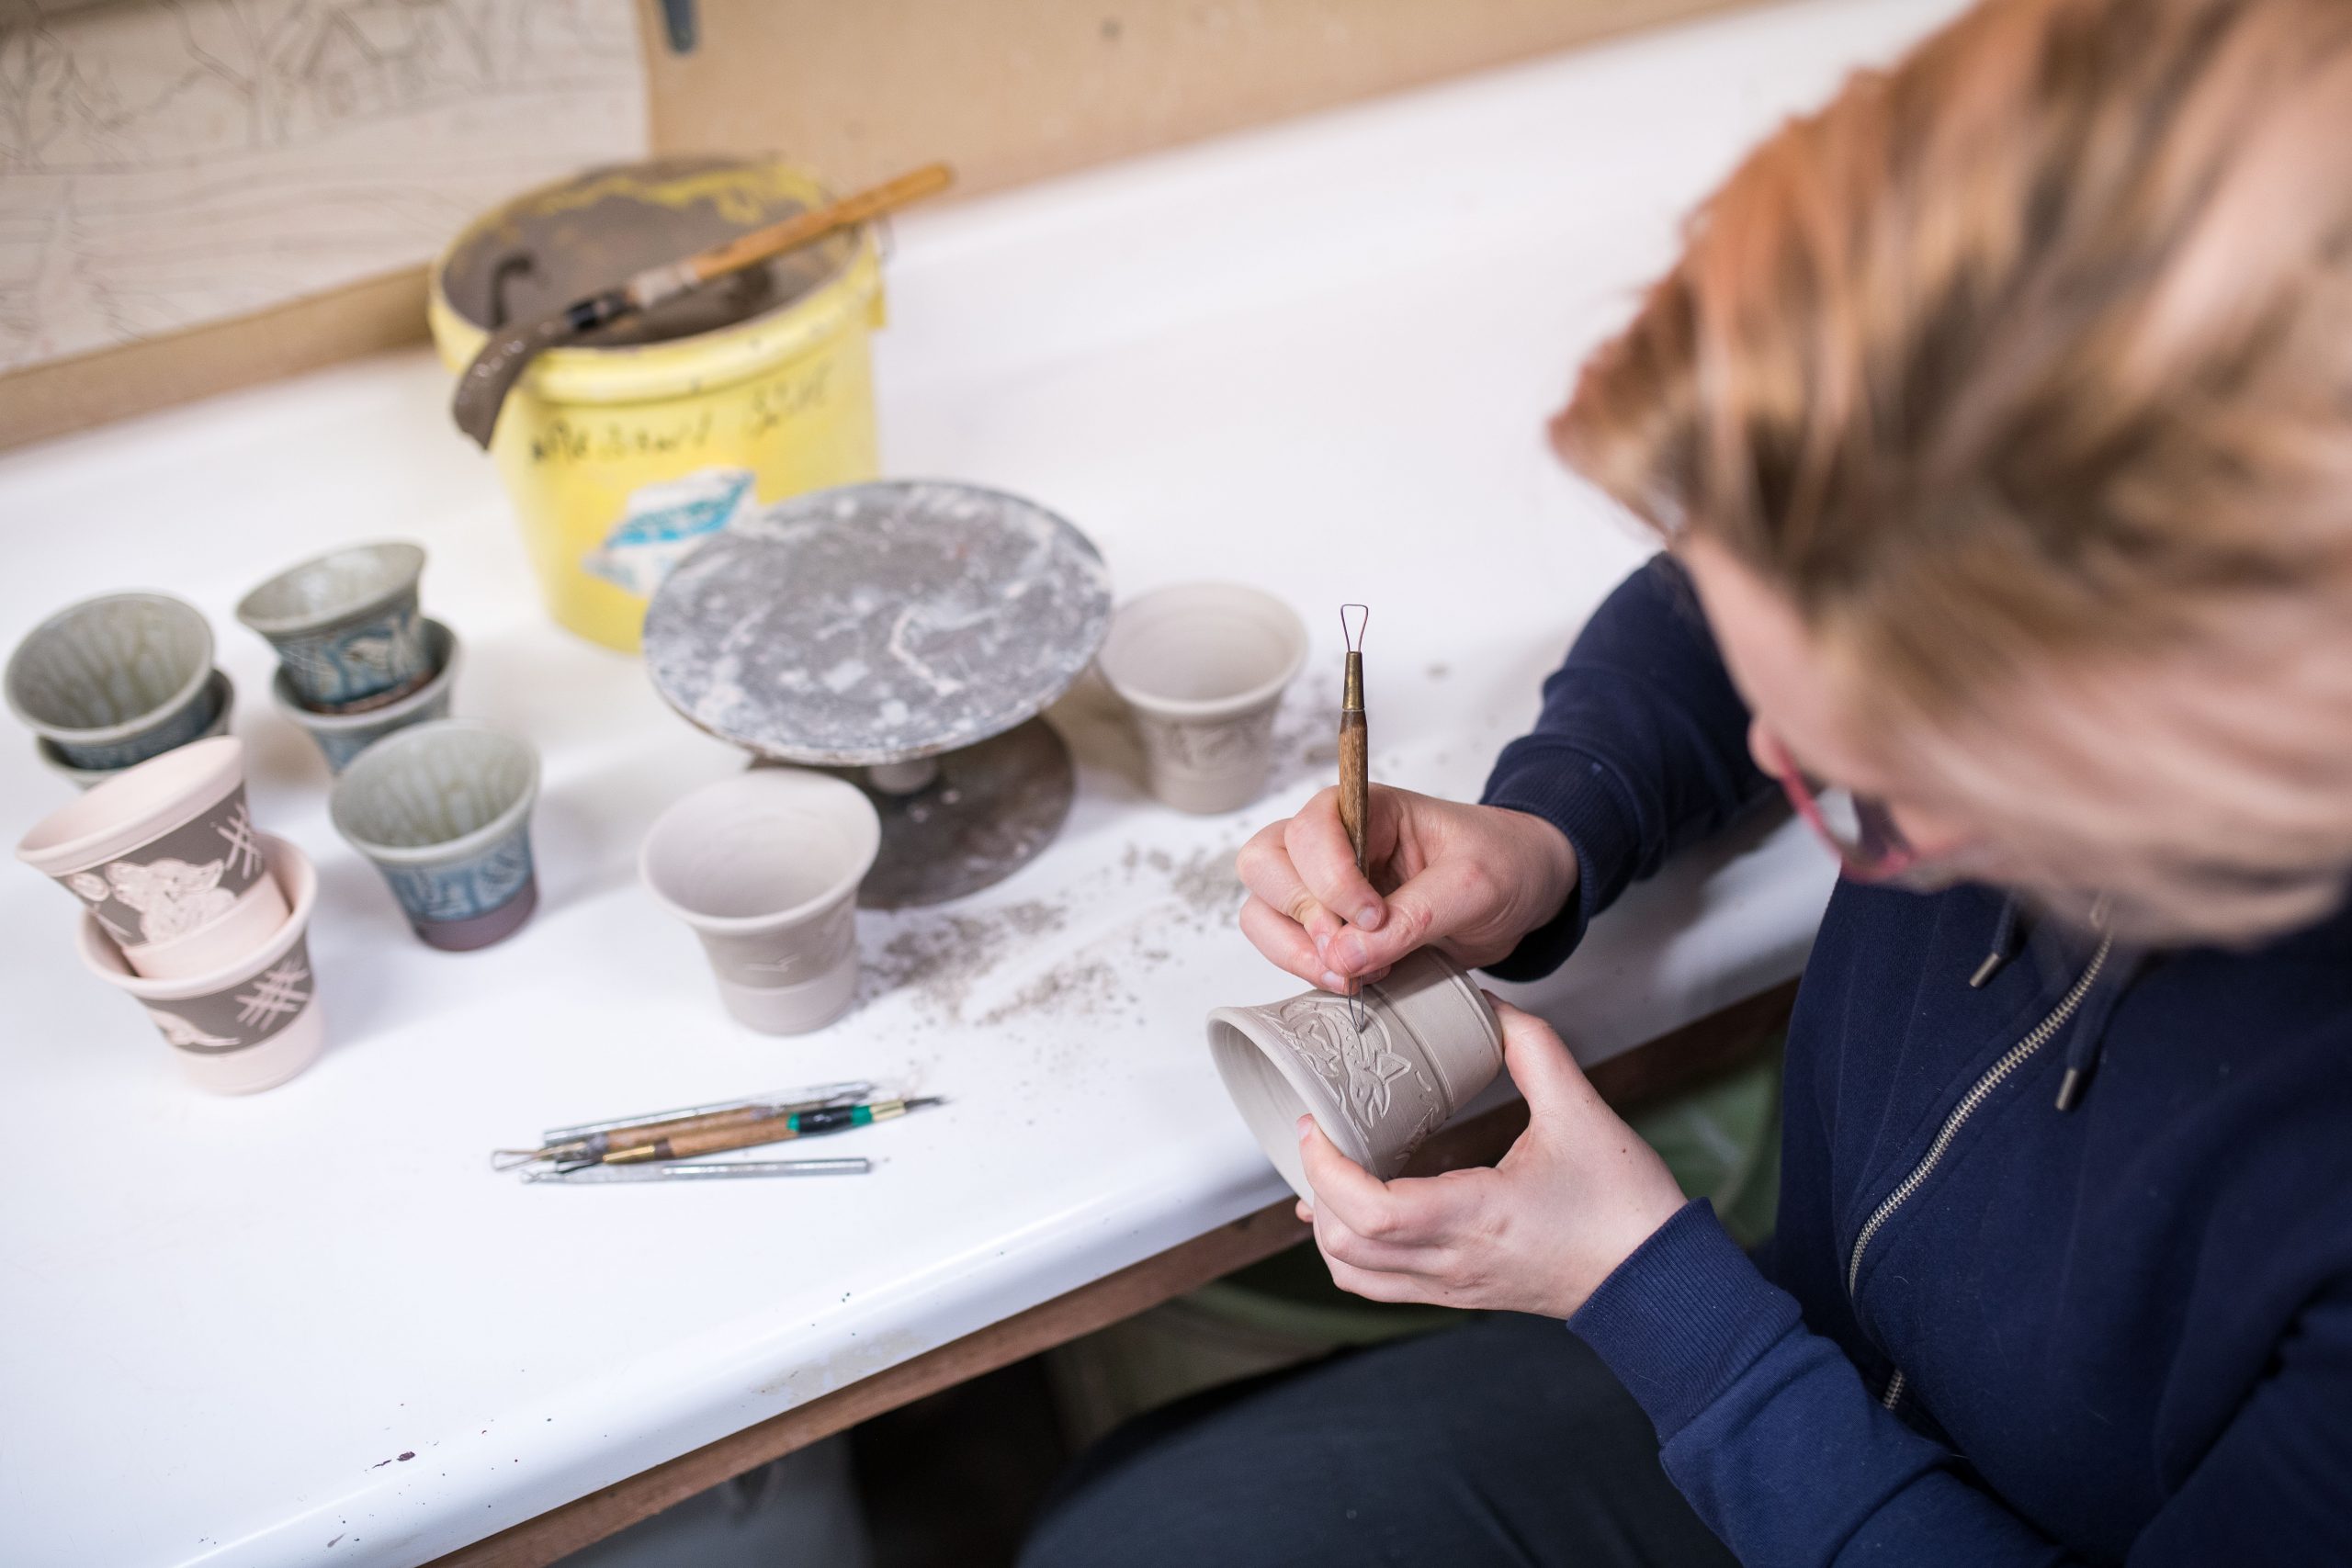 A woman etches markings into pottery.